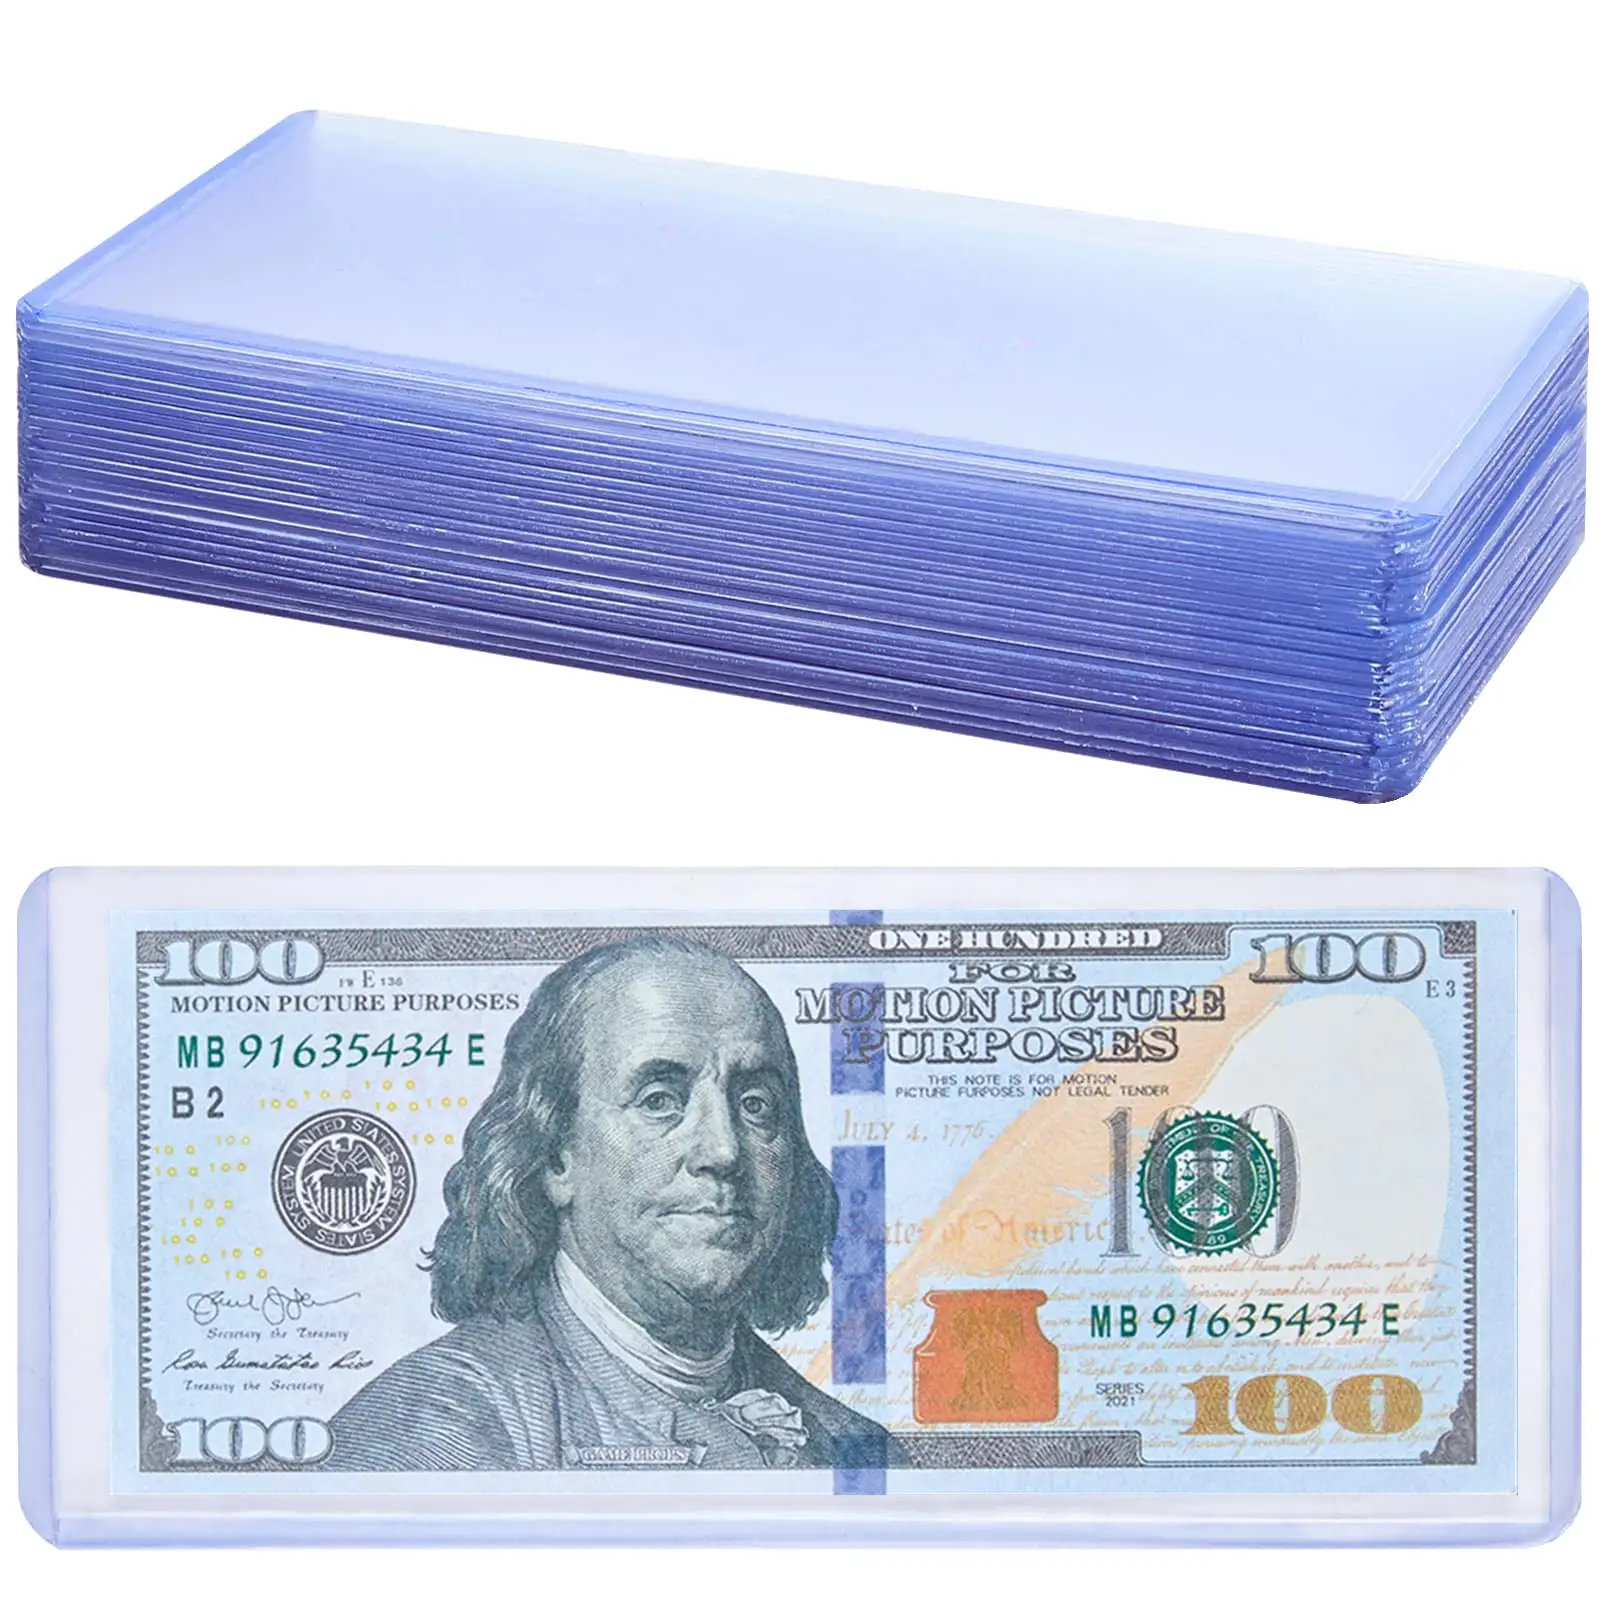 Custom 6.8 X 2.9 Inch Transparent Regular Currency Banknotes Stamp Collecting Dollar Bill Top Loader Protectors Holders Sleeves